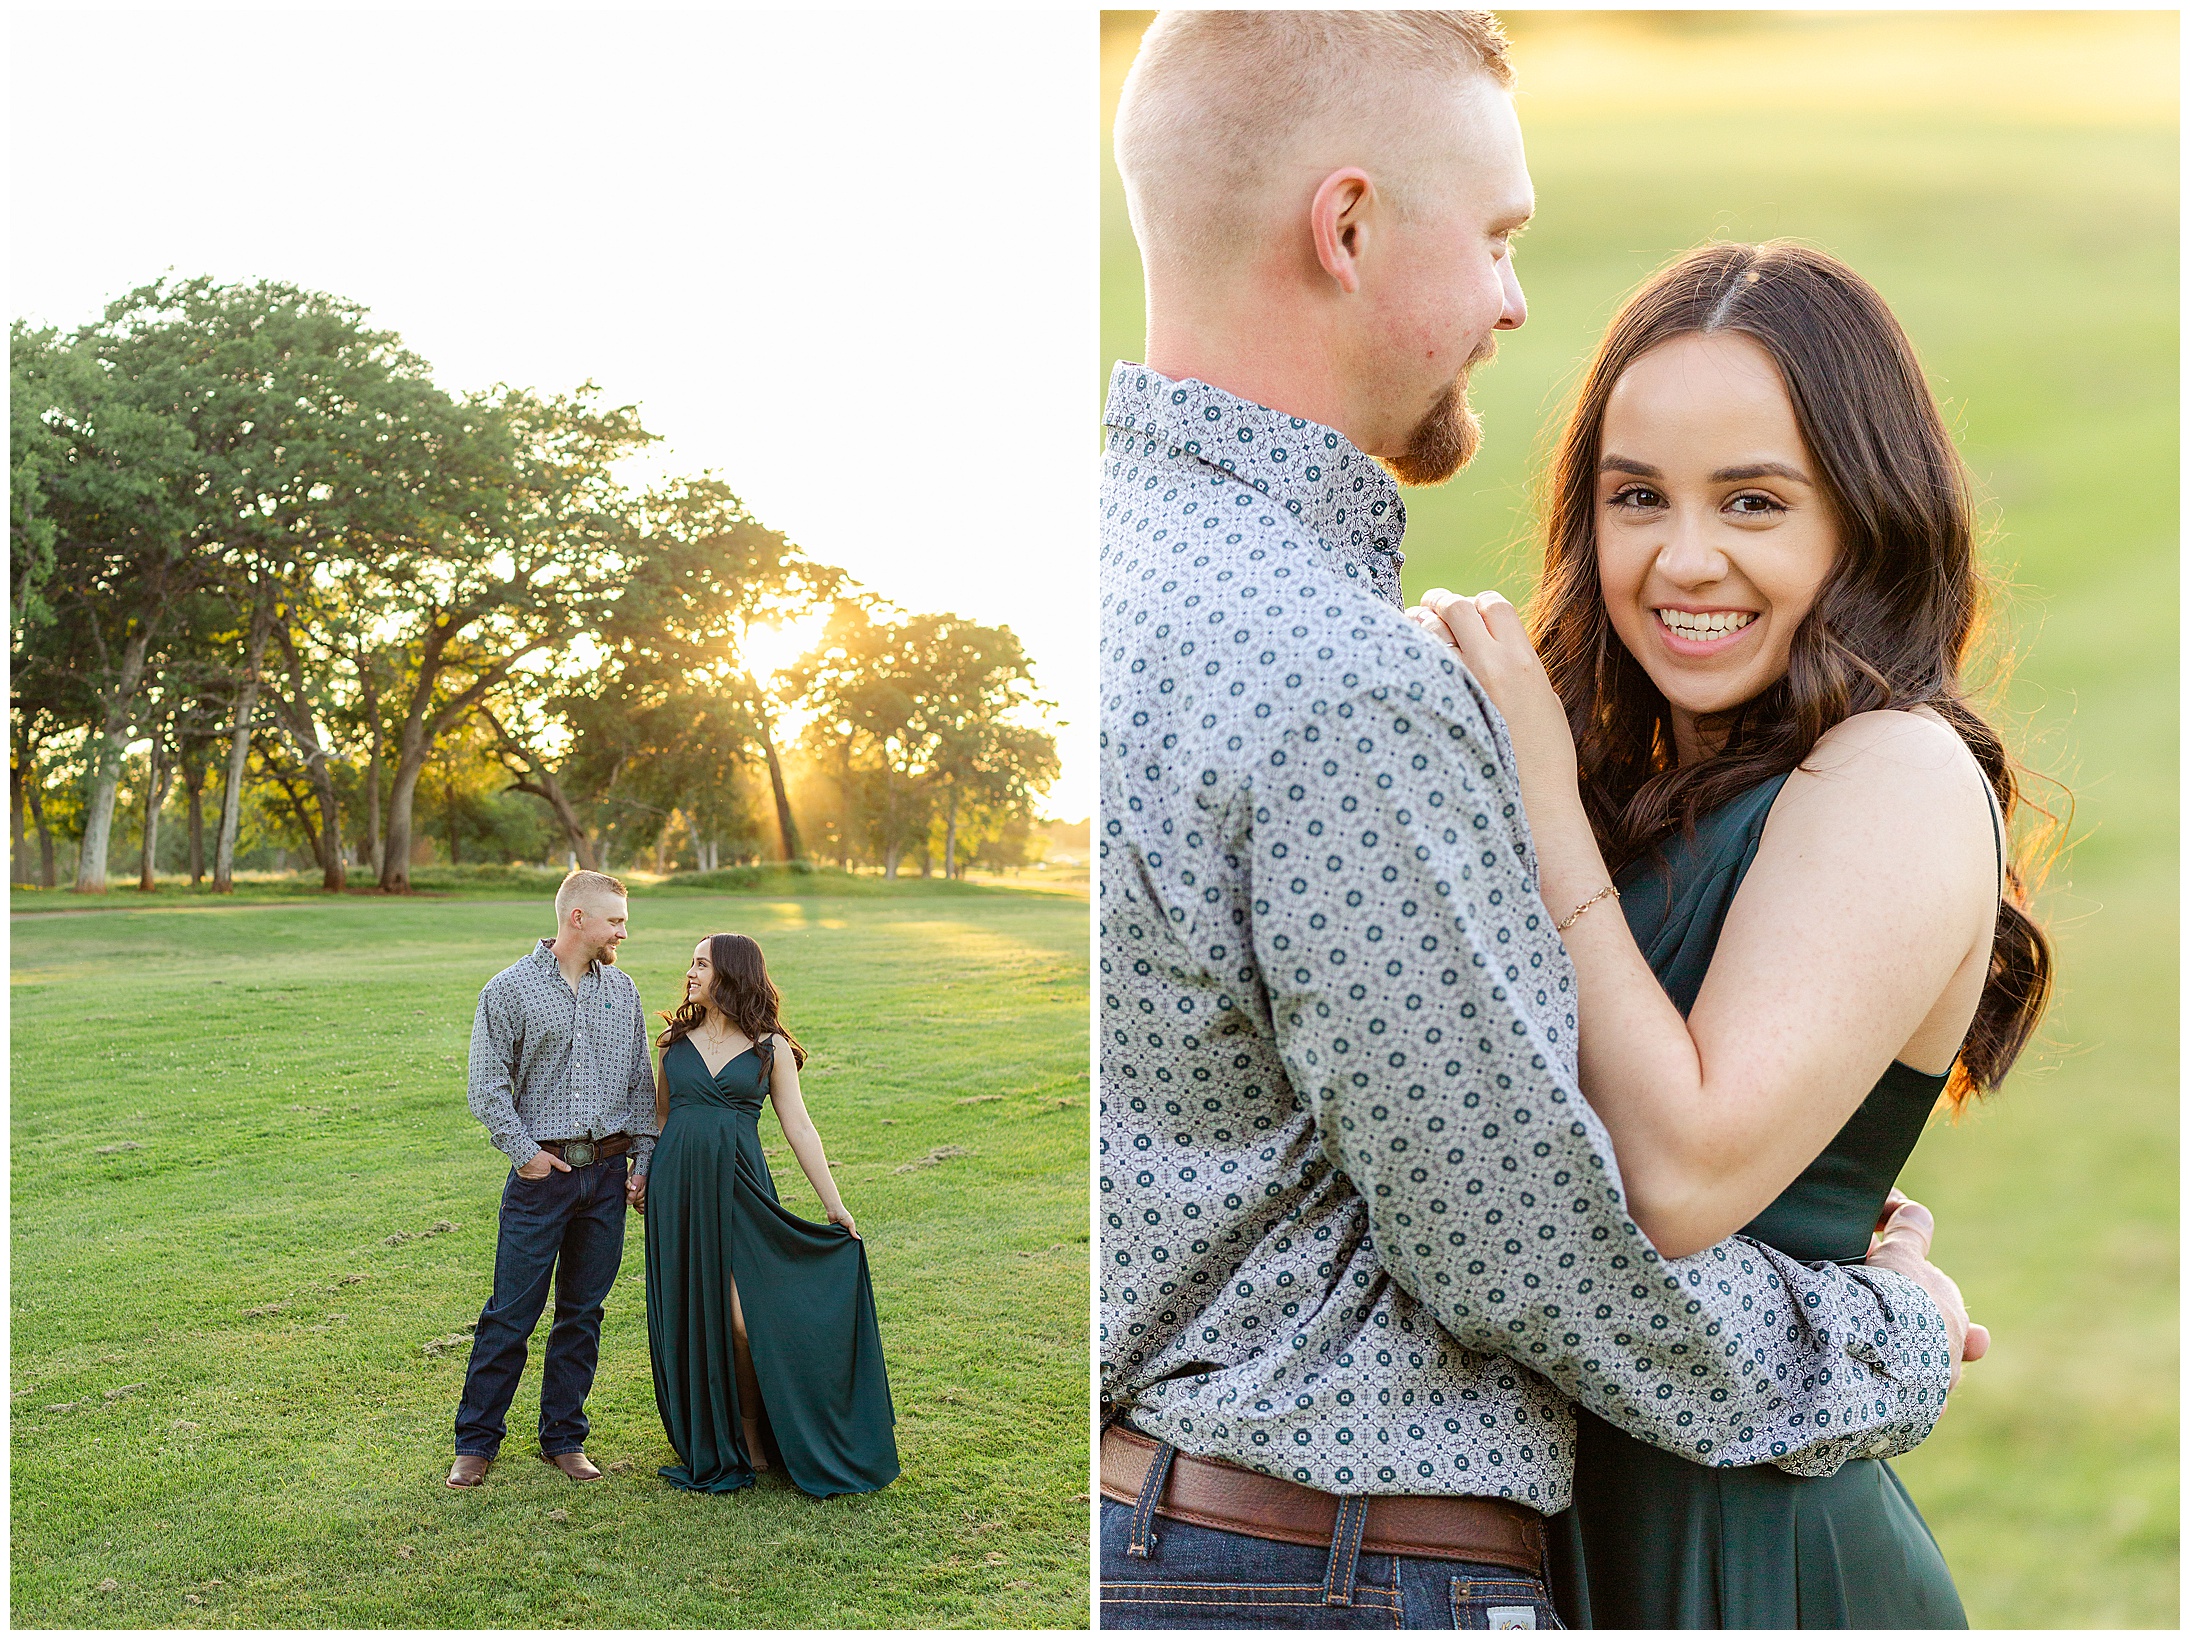 Bidwell Park Golf Course Engagement Session Chico CA Lilies,